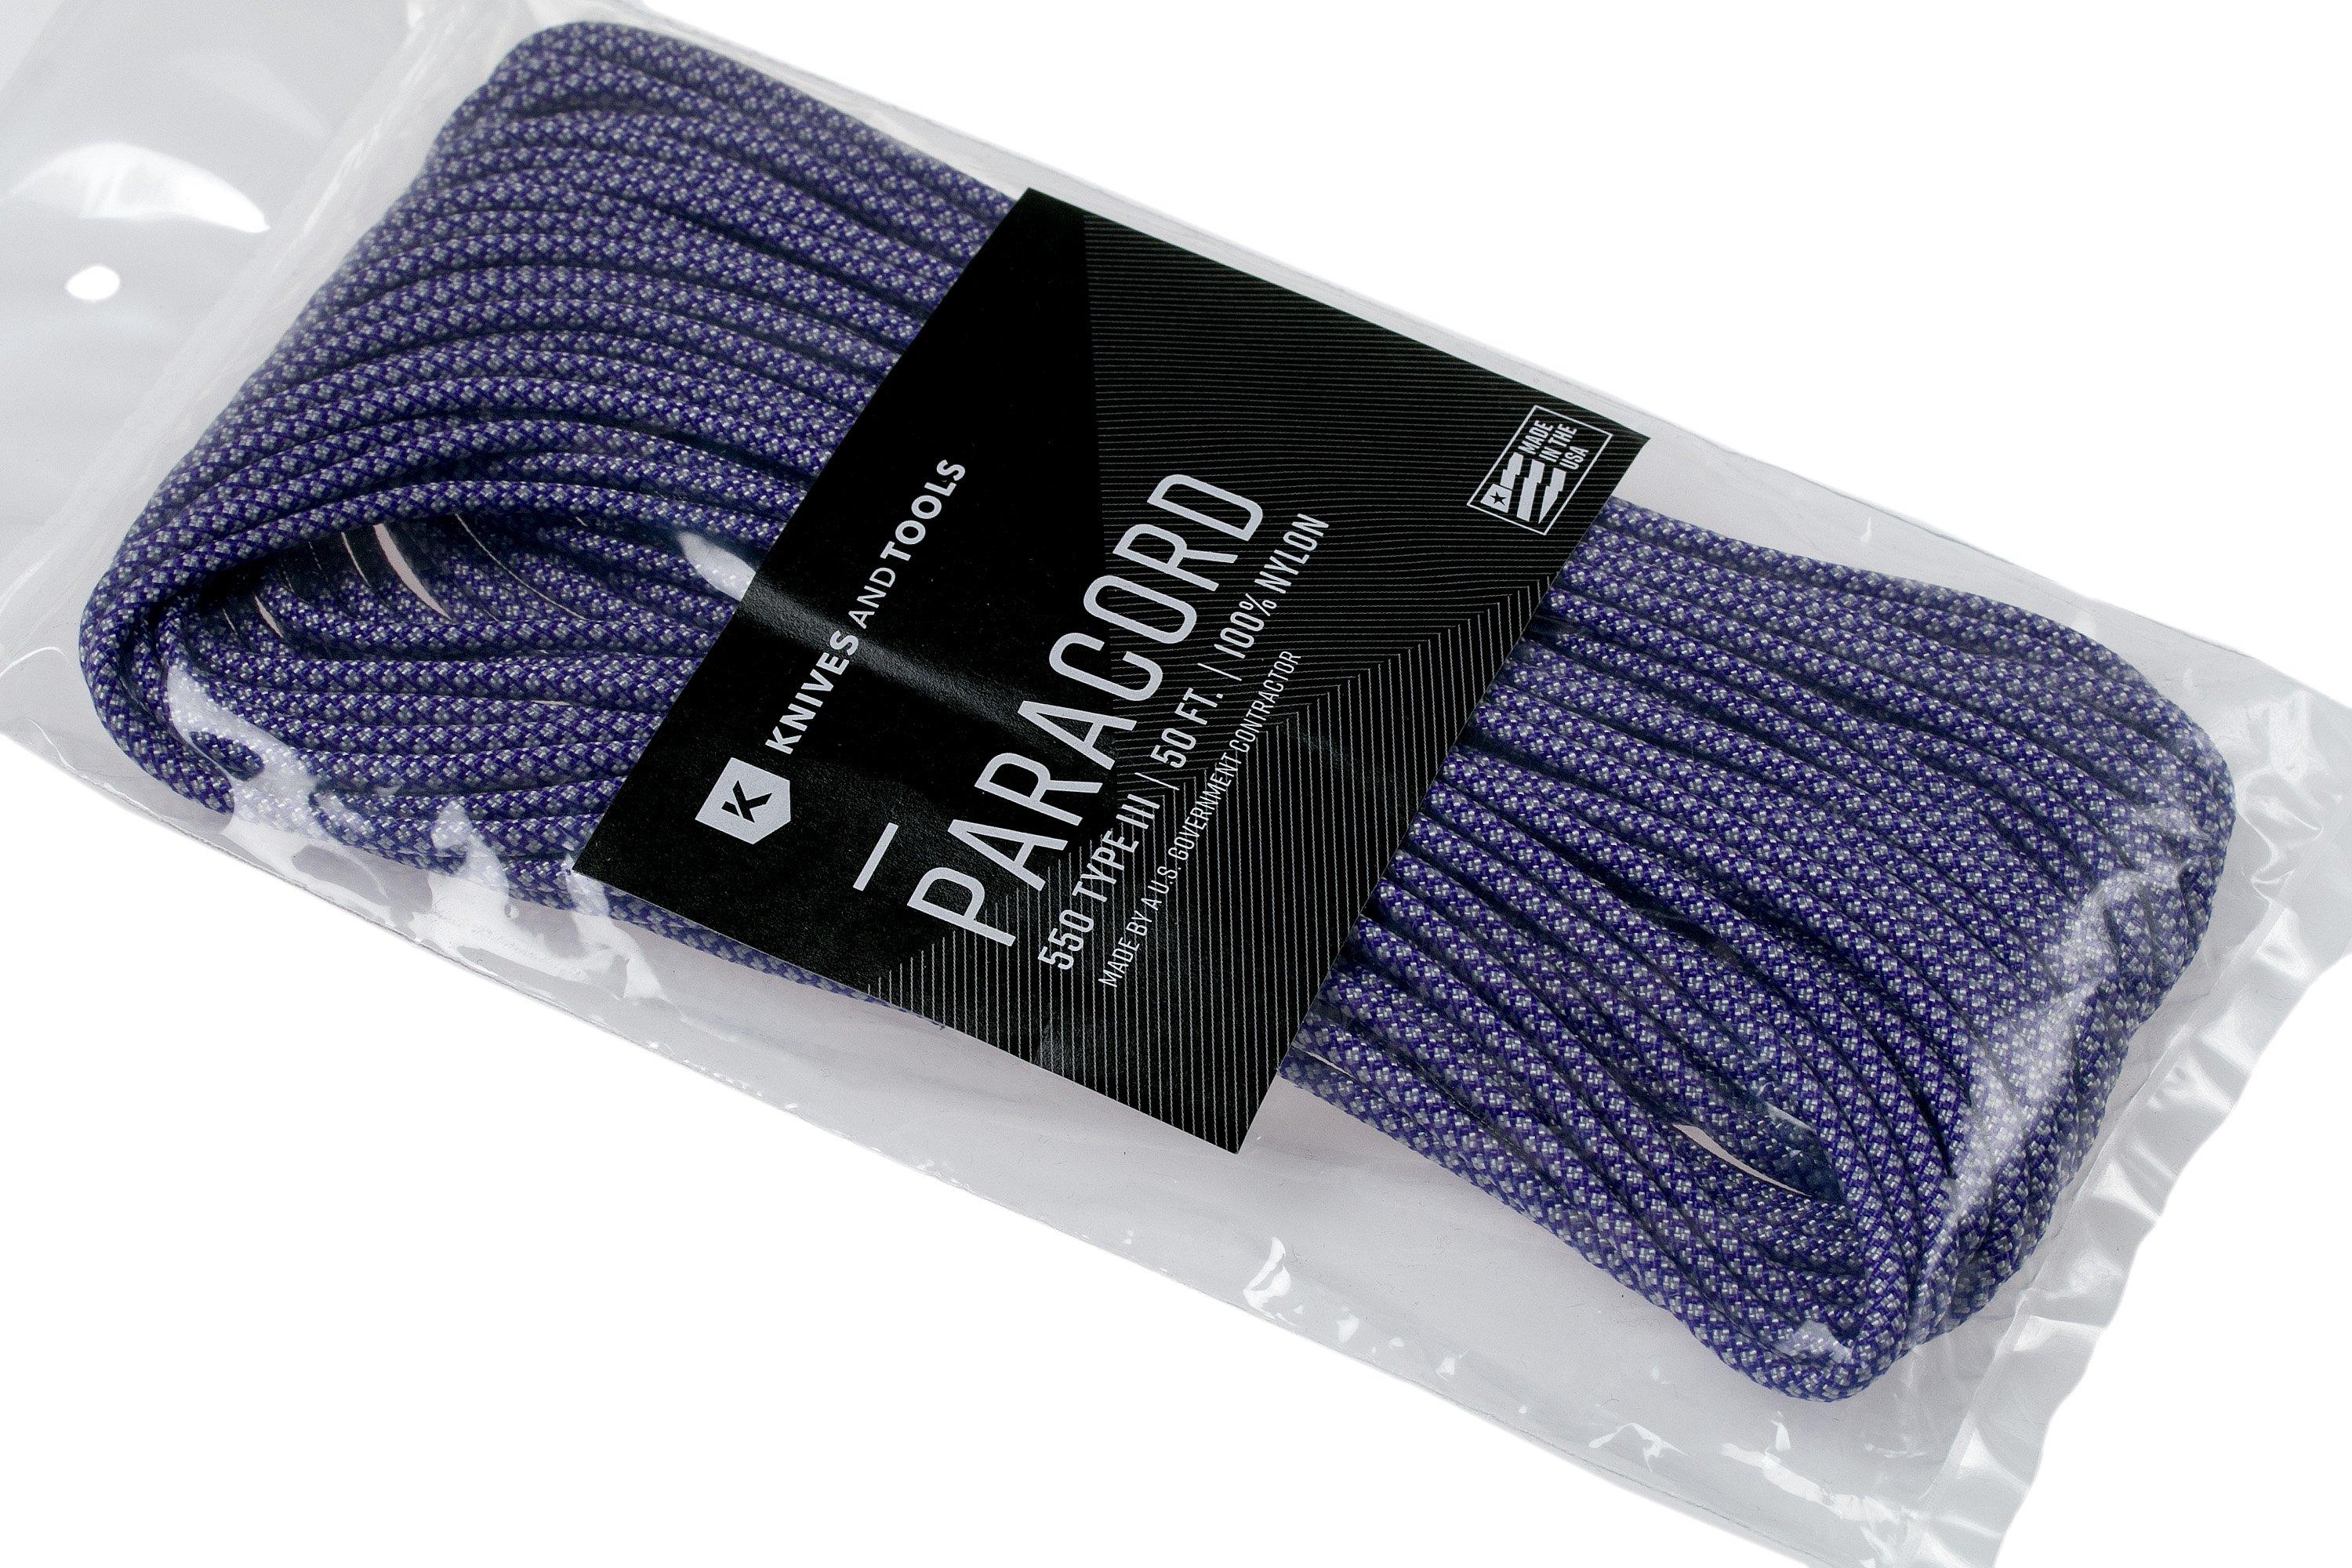 Knivesandtools 550 paracord type III, colour: acid purple with silver grey  diamonds - 50 ft (15.24 meters)